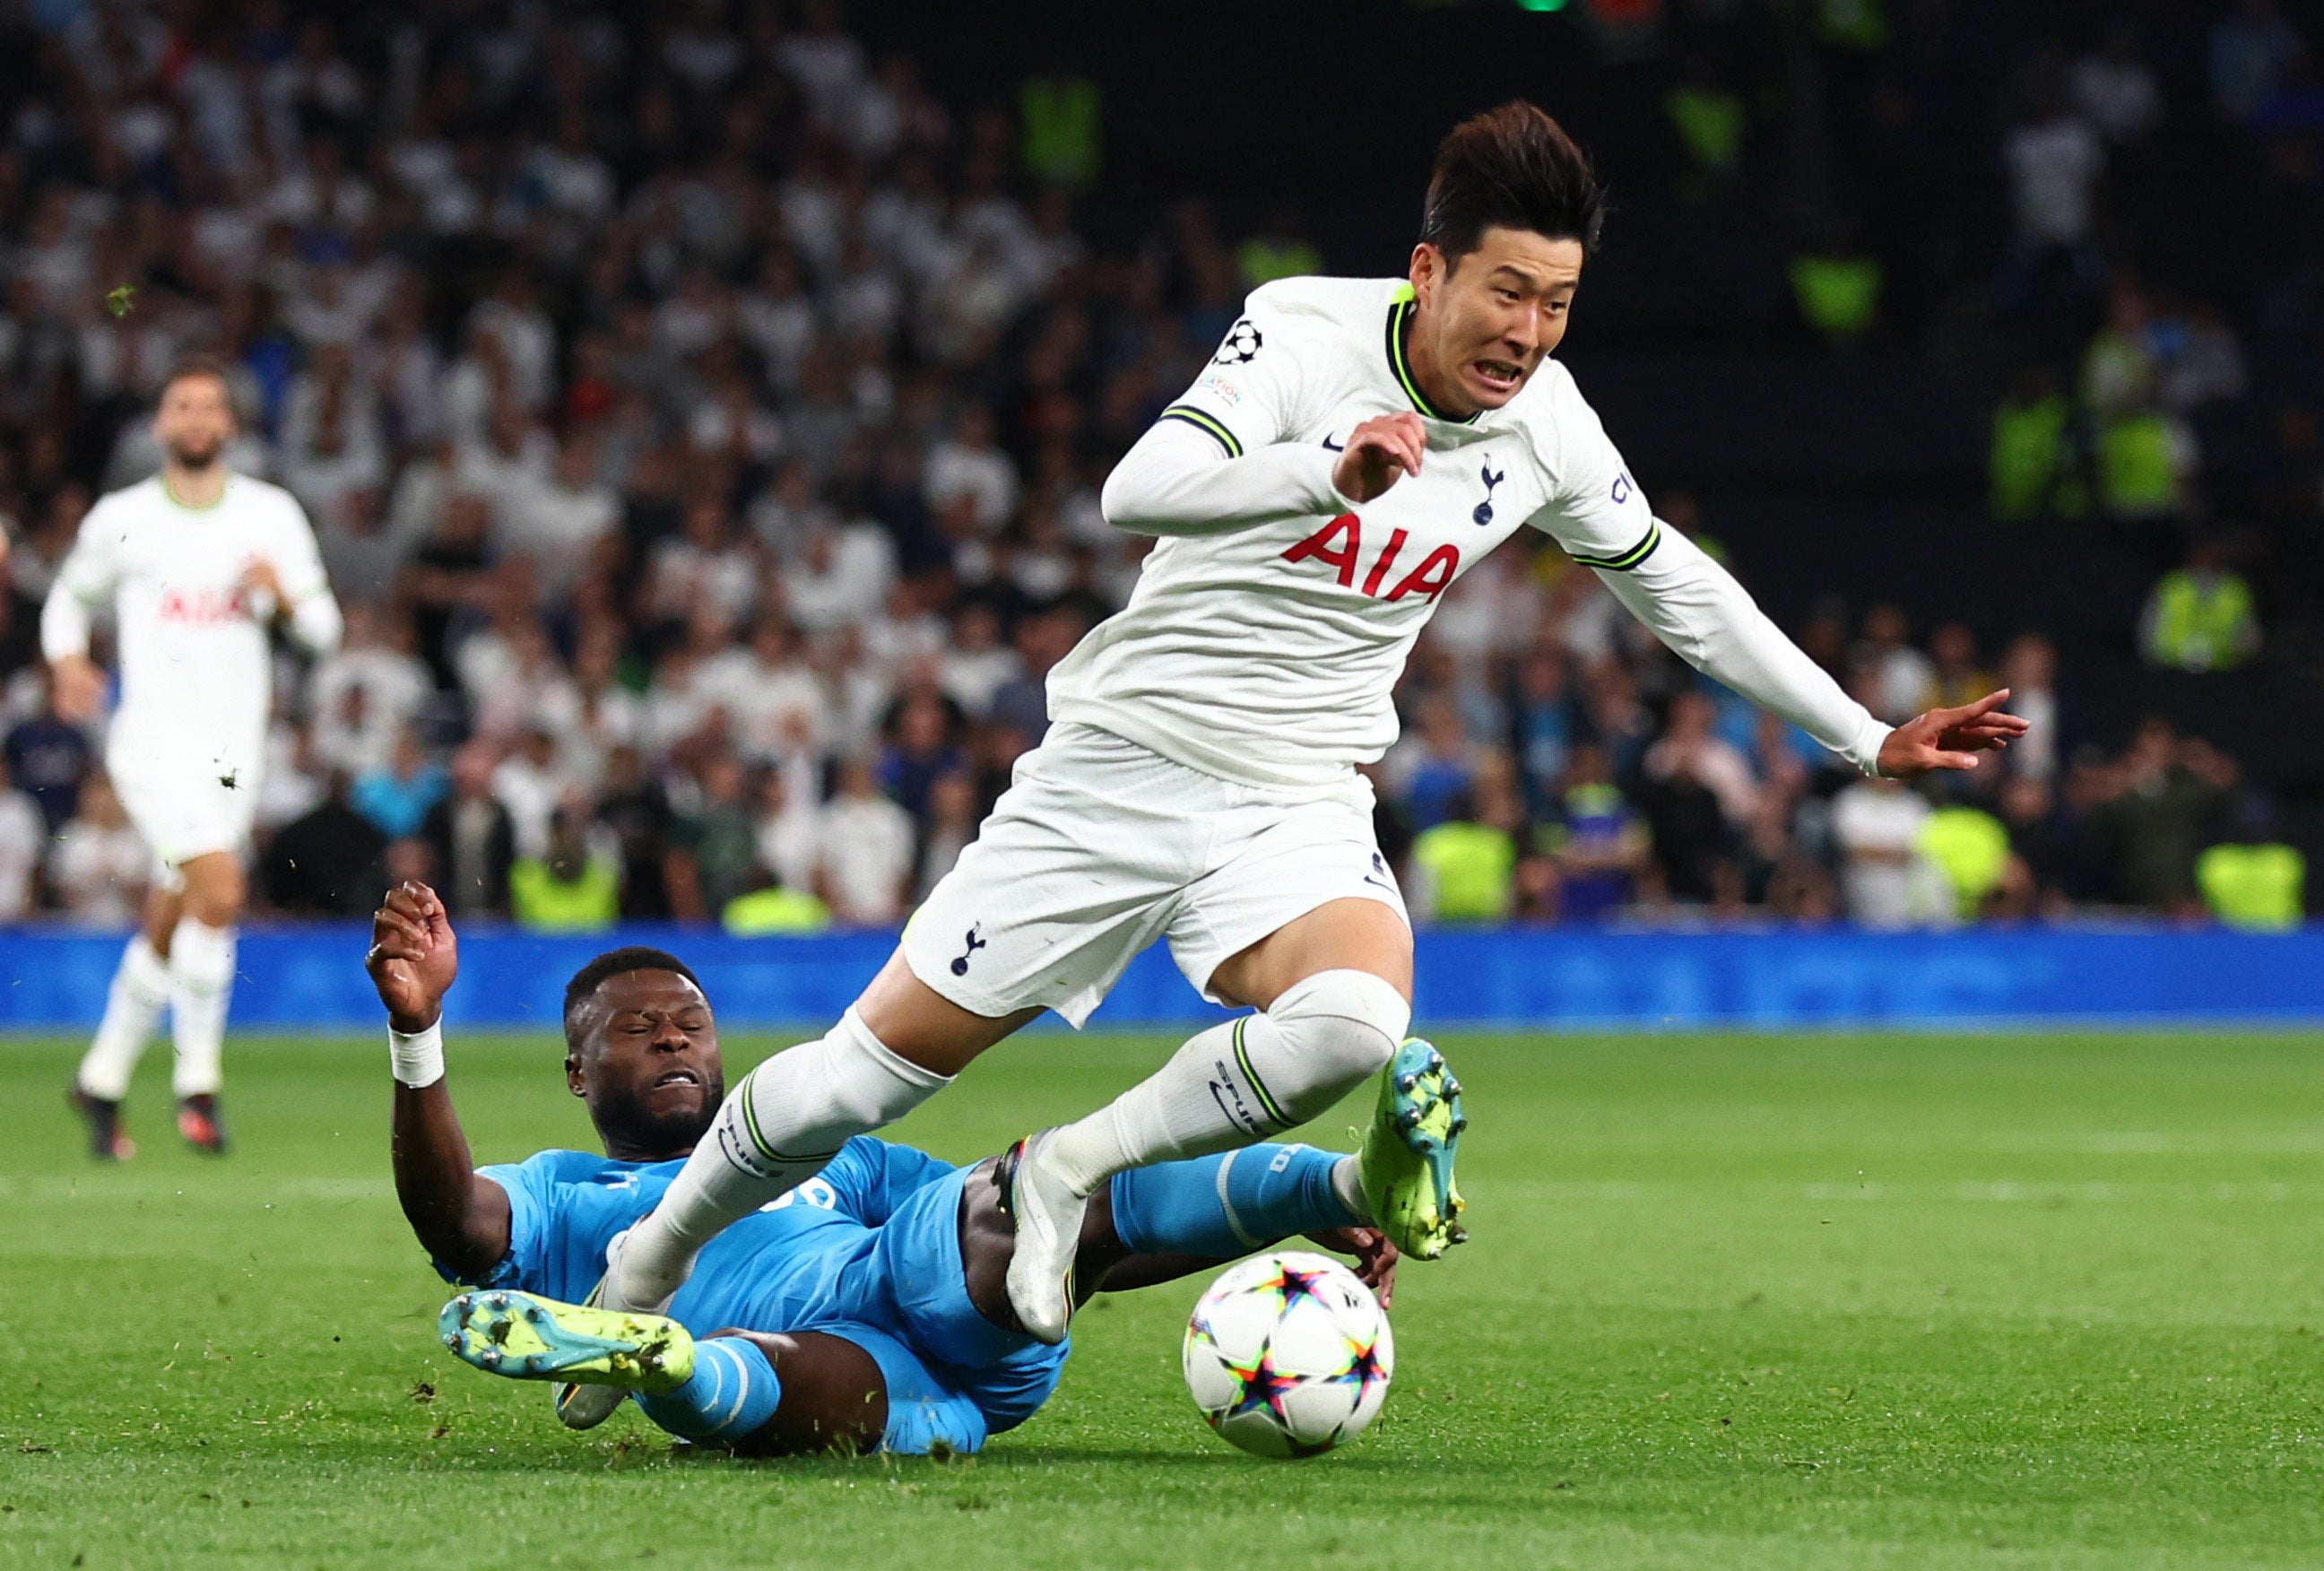 Chancel Mbemba was sent off for cynically hacking down Son Heung-min